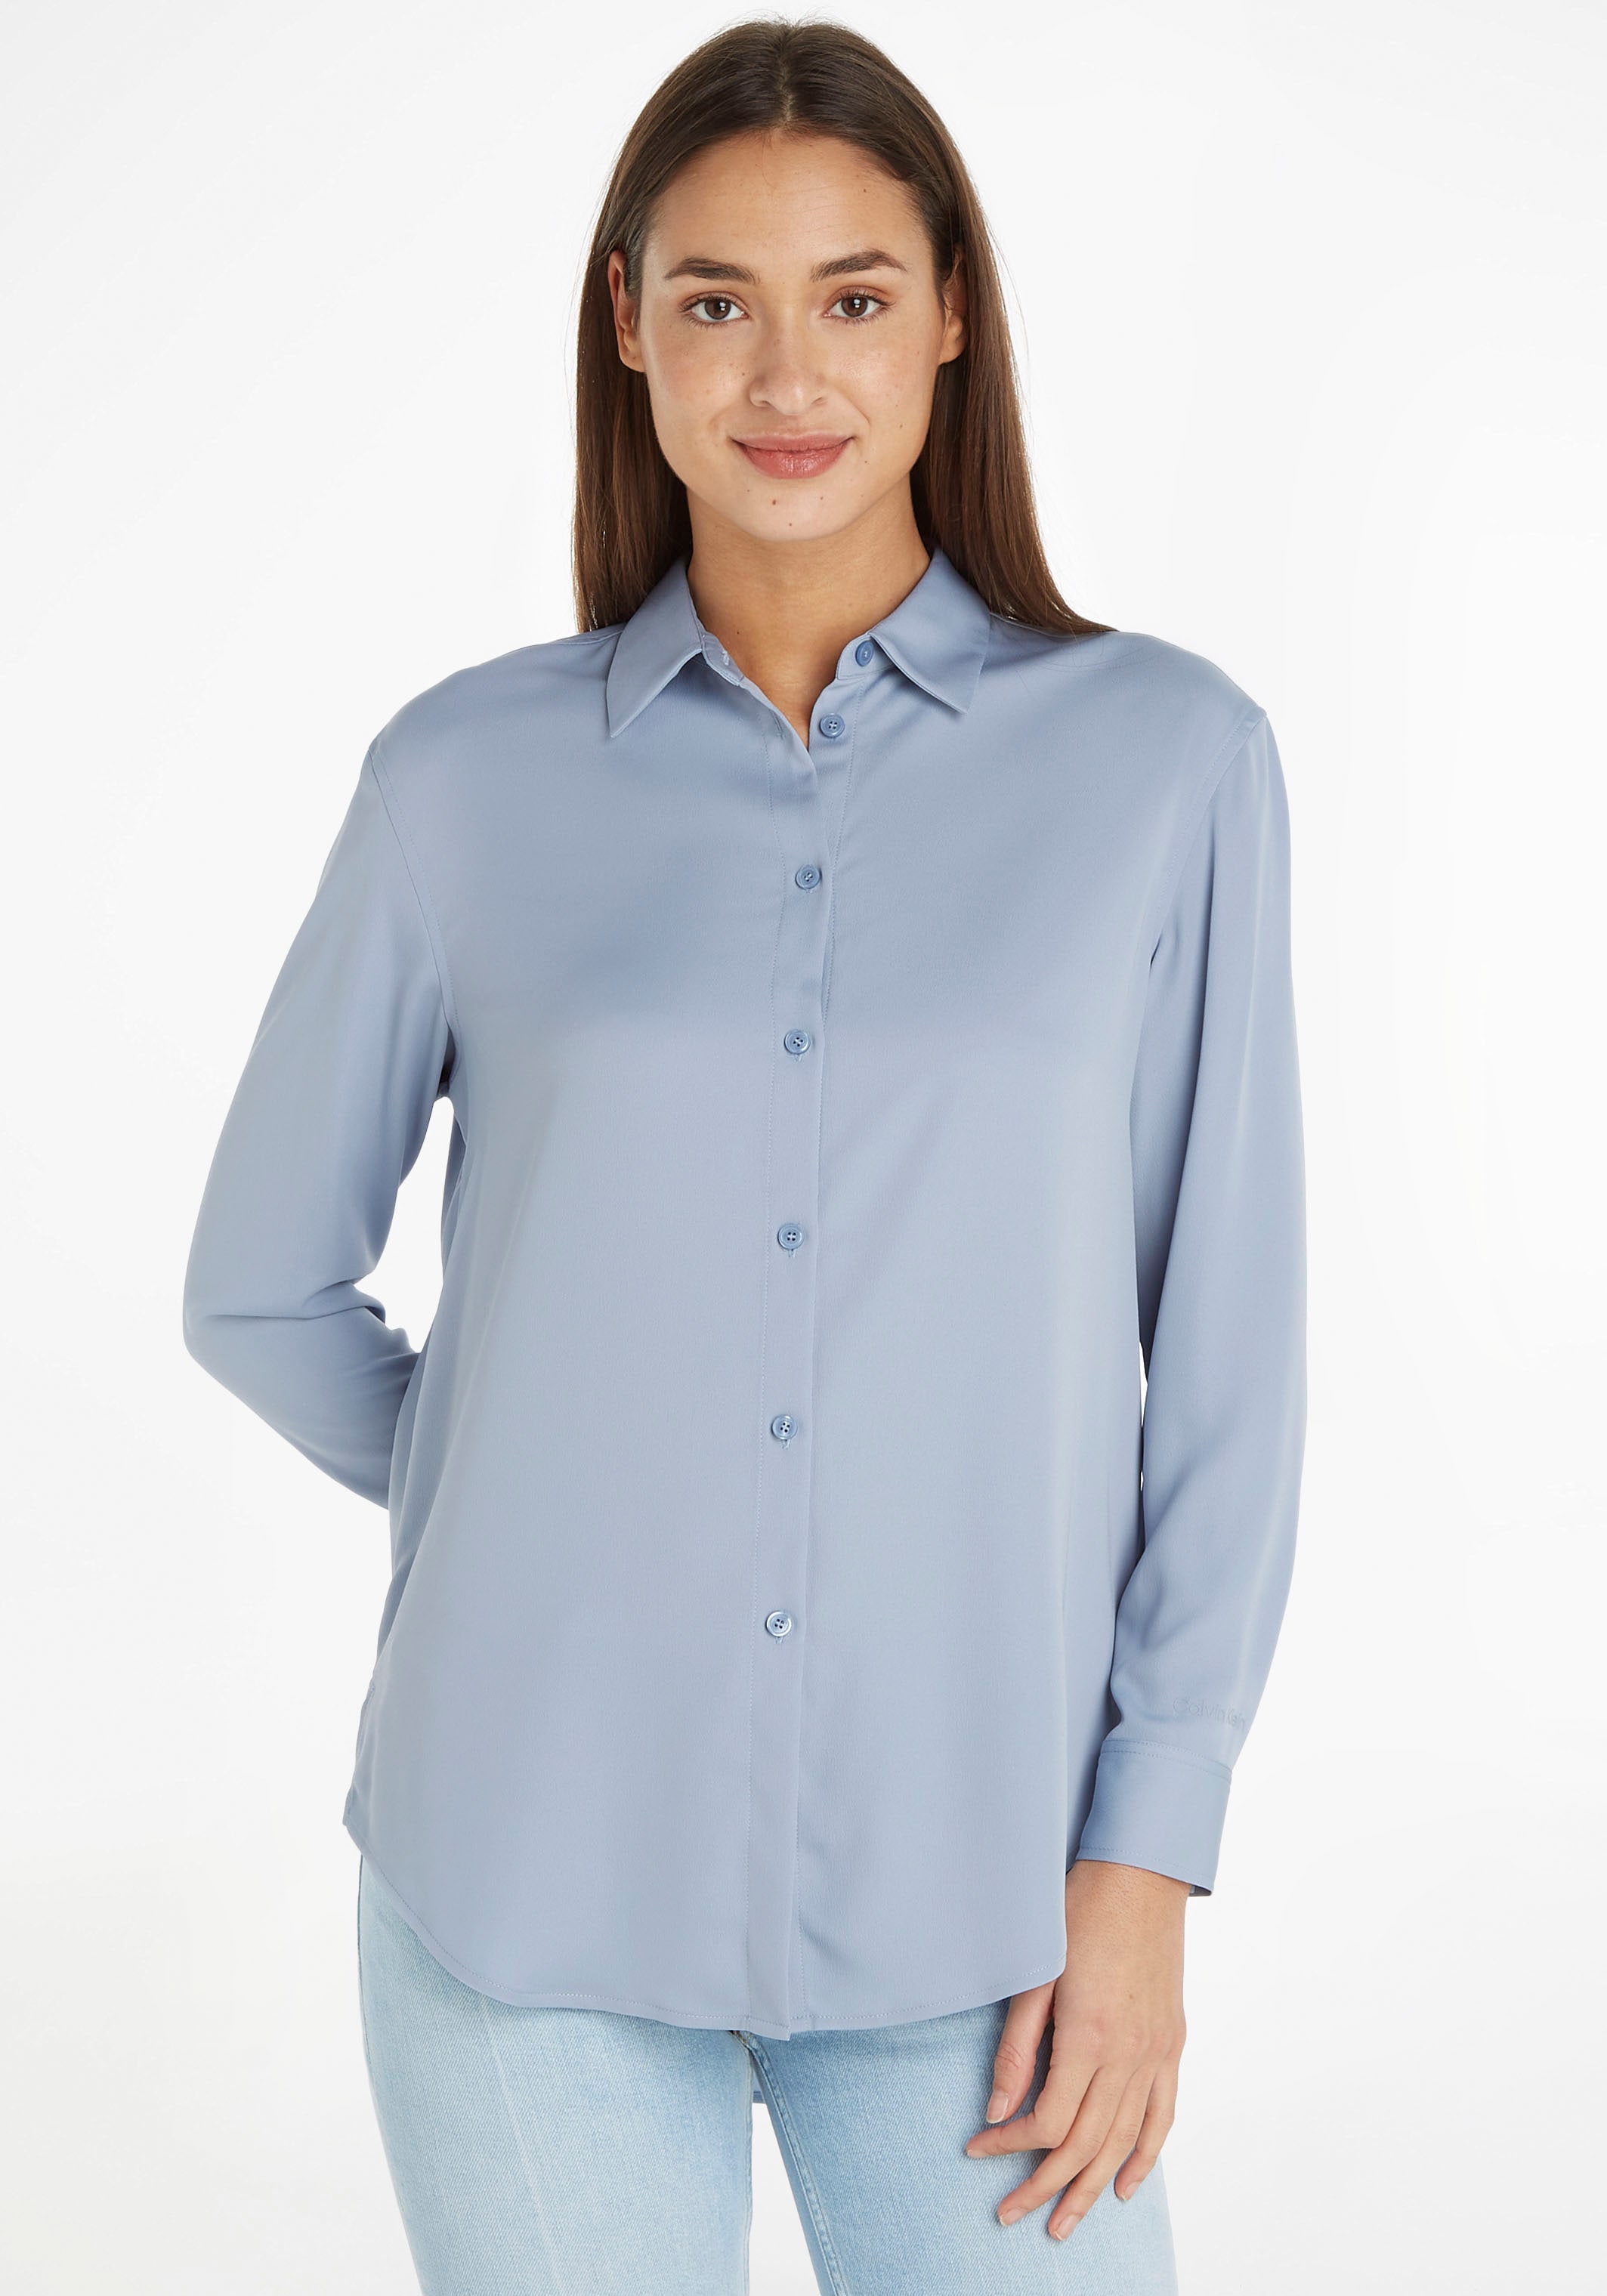 Calvin Klein SHIRT«, bei Hemdbluse RELAXED »RECYCLED Vokuhila-Style im CDC OTTO online